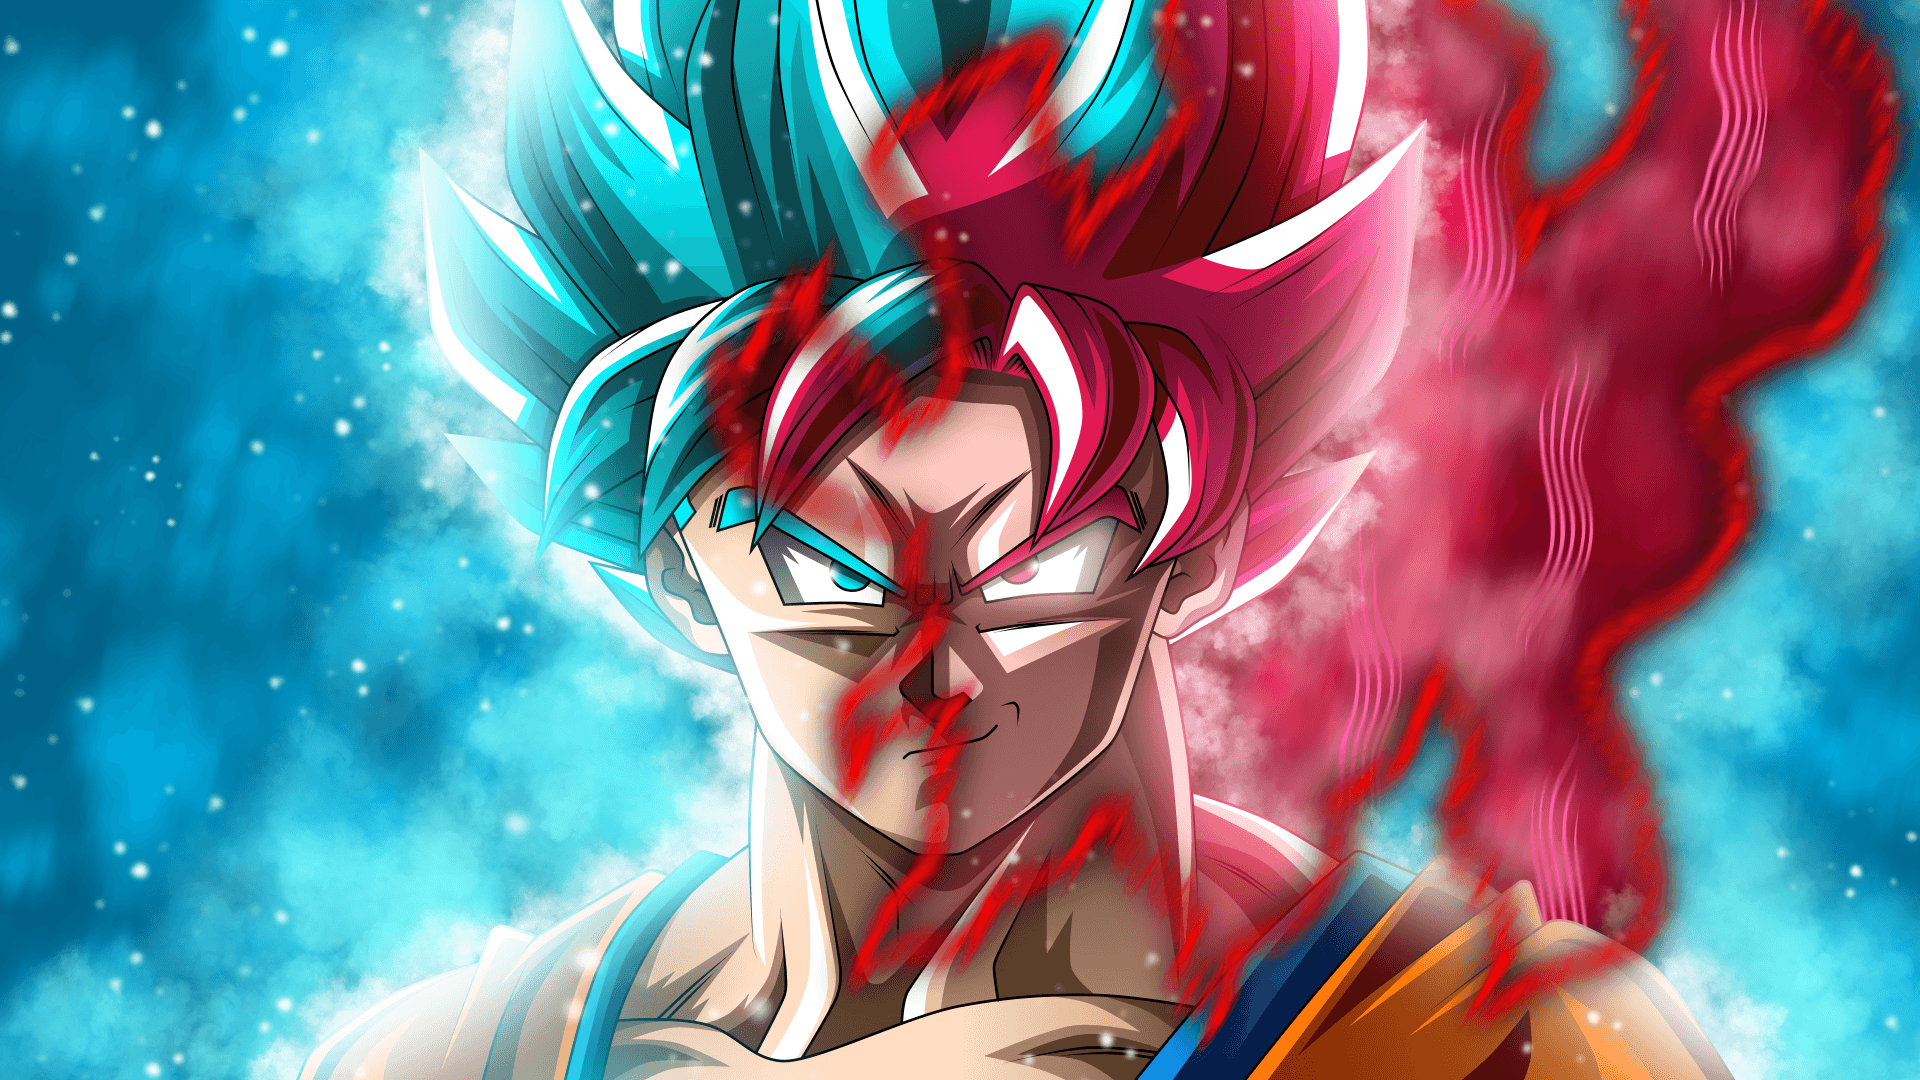 1080x1920 Goku Anime Iphone 76s6 Plus Pixel xl One Plus 33t5 HD 4k  Wallpapers Images Backgrounds Photos and Pictures